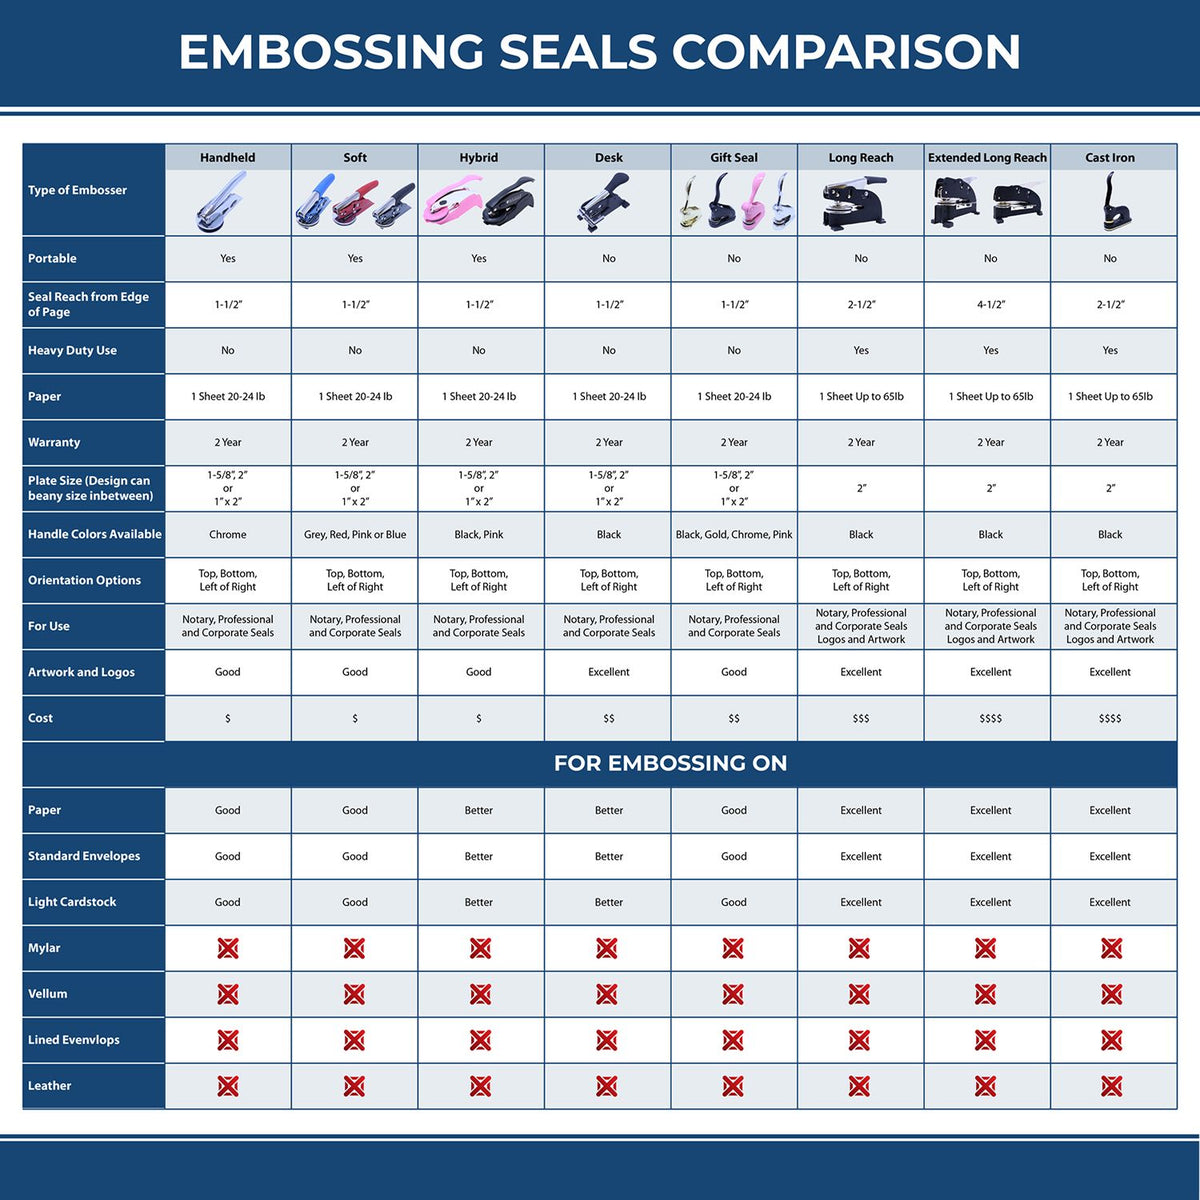 A comparison chart for the different types of mount models available for the Heavy Duty Cast Iron South Dakota Geologist Seal Embosser